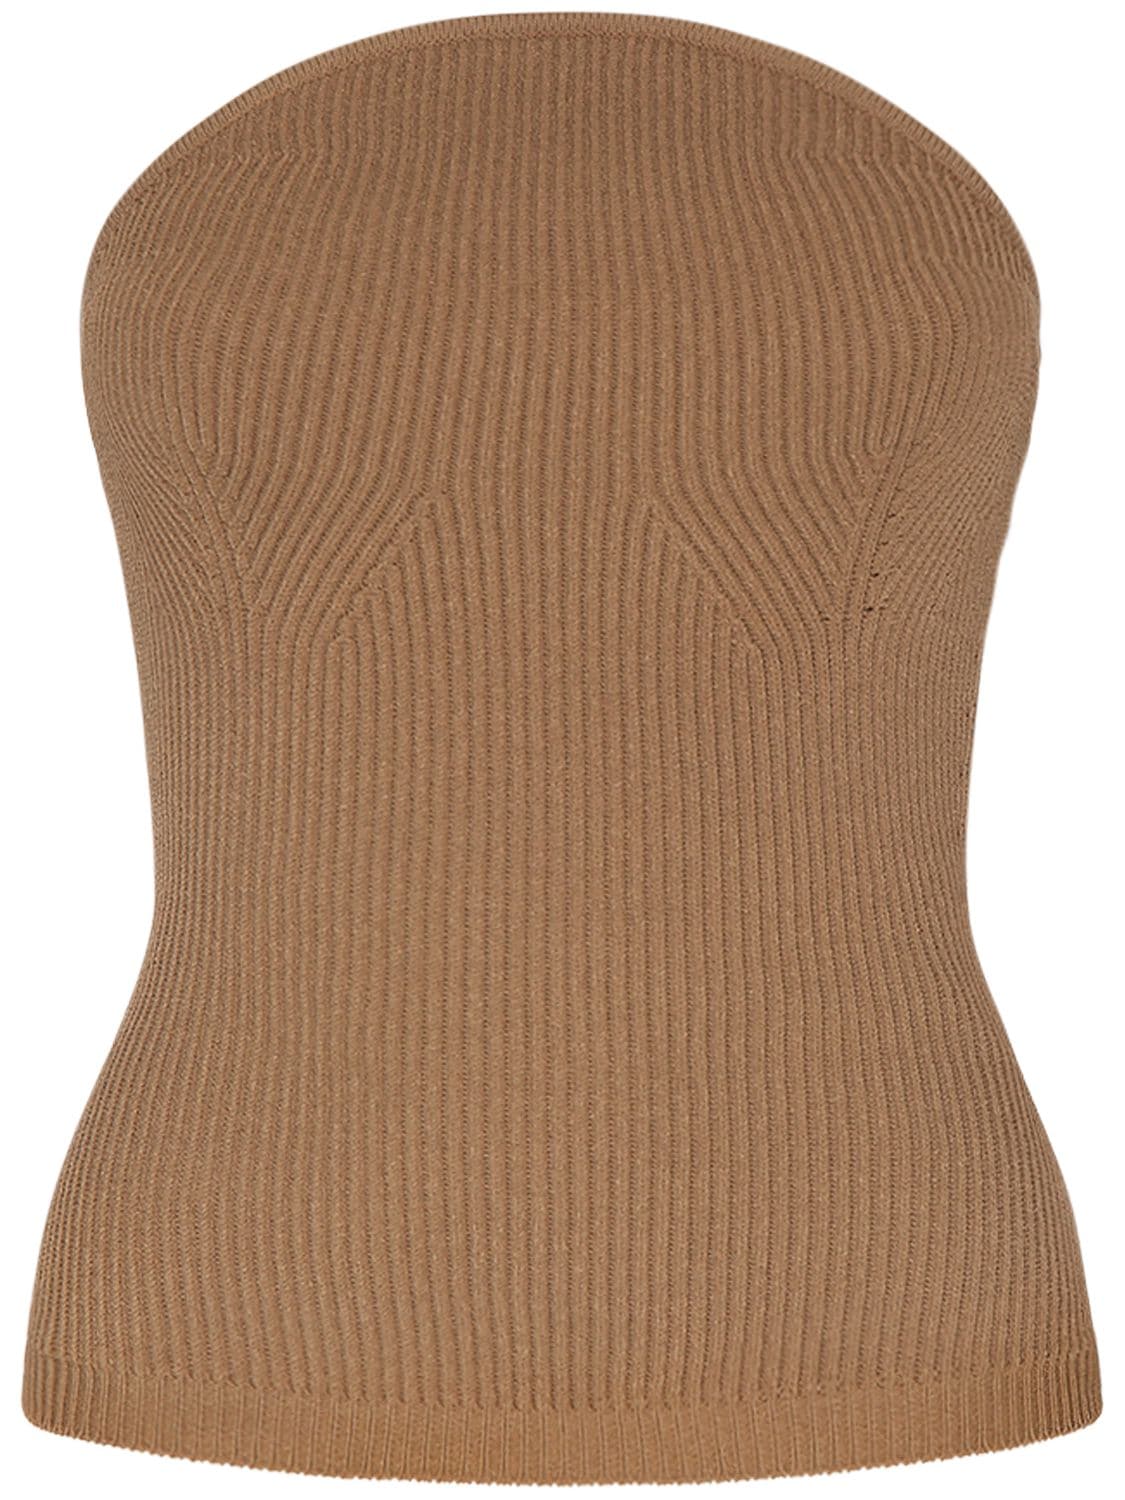 Image of Jericho Viscose Blend Strapless Top